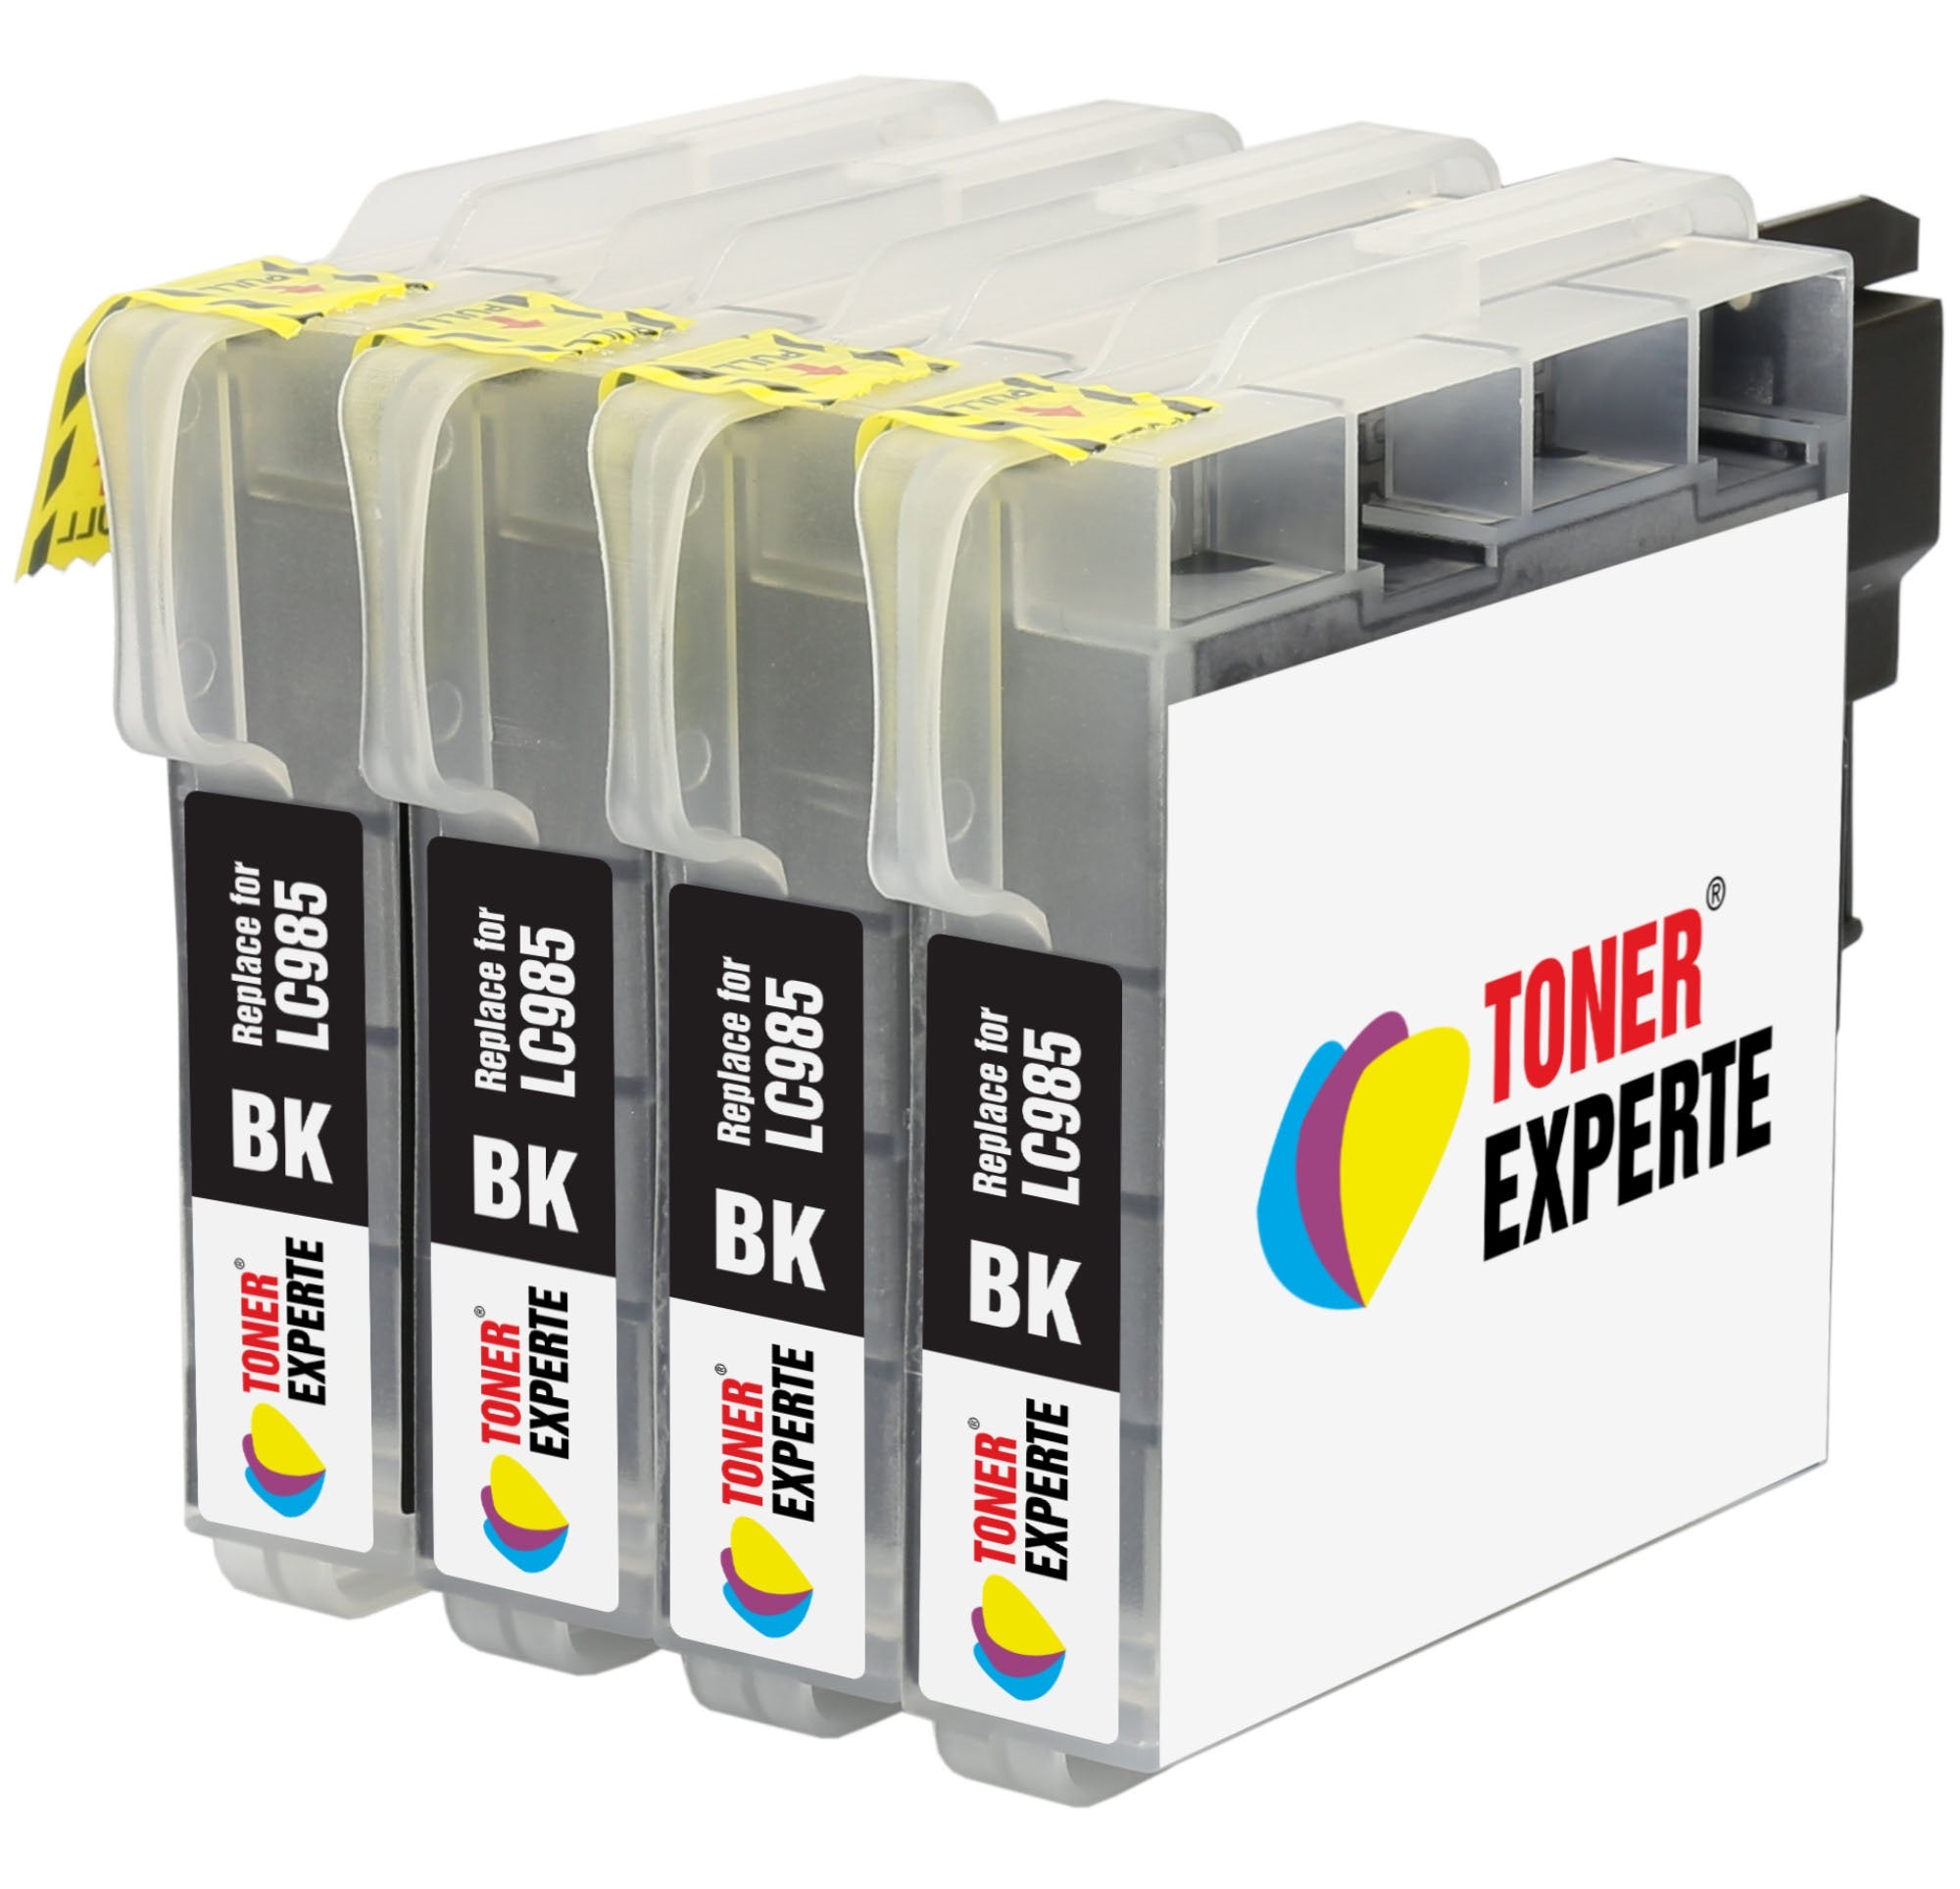 LC985 Compatible Ink Cartridges for Brother - Toner Experte